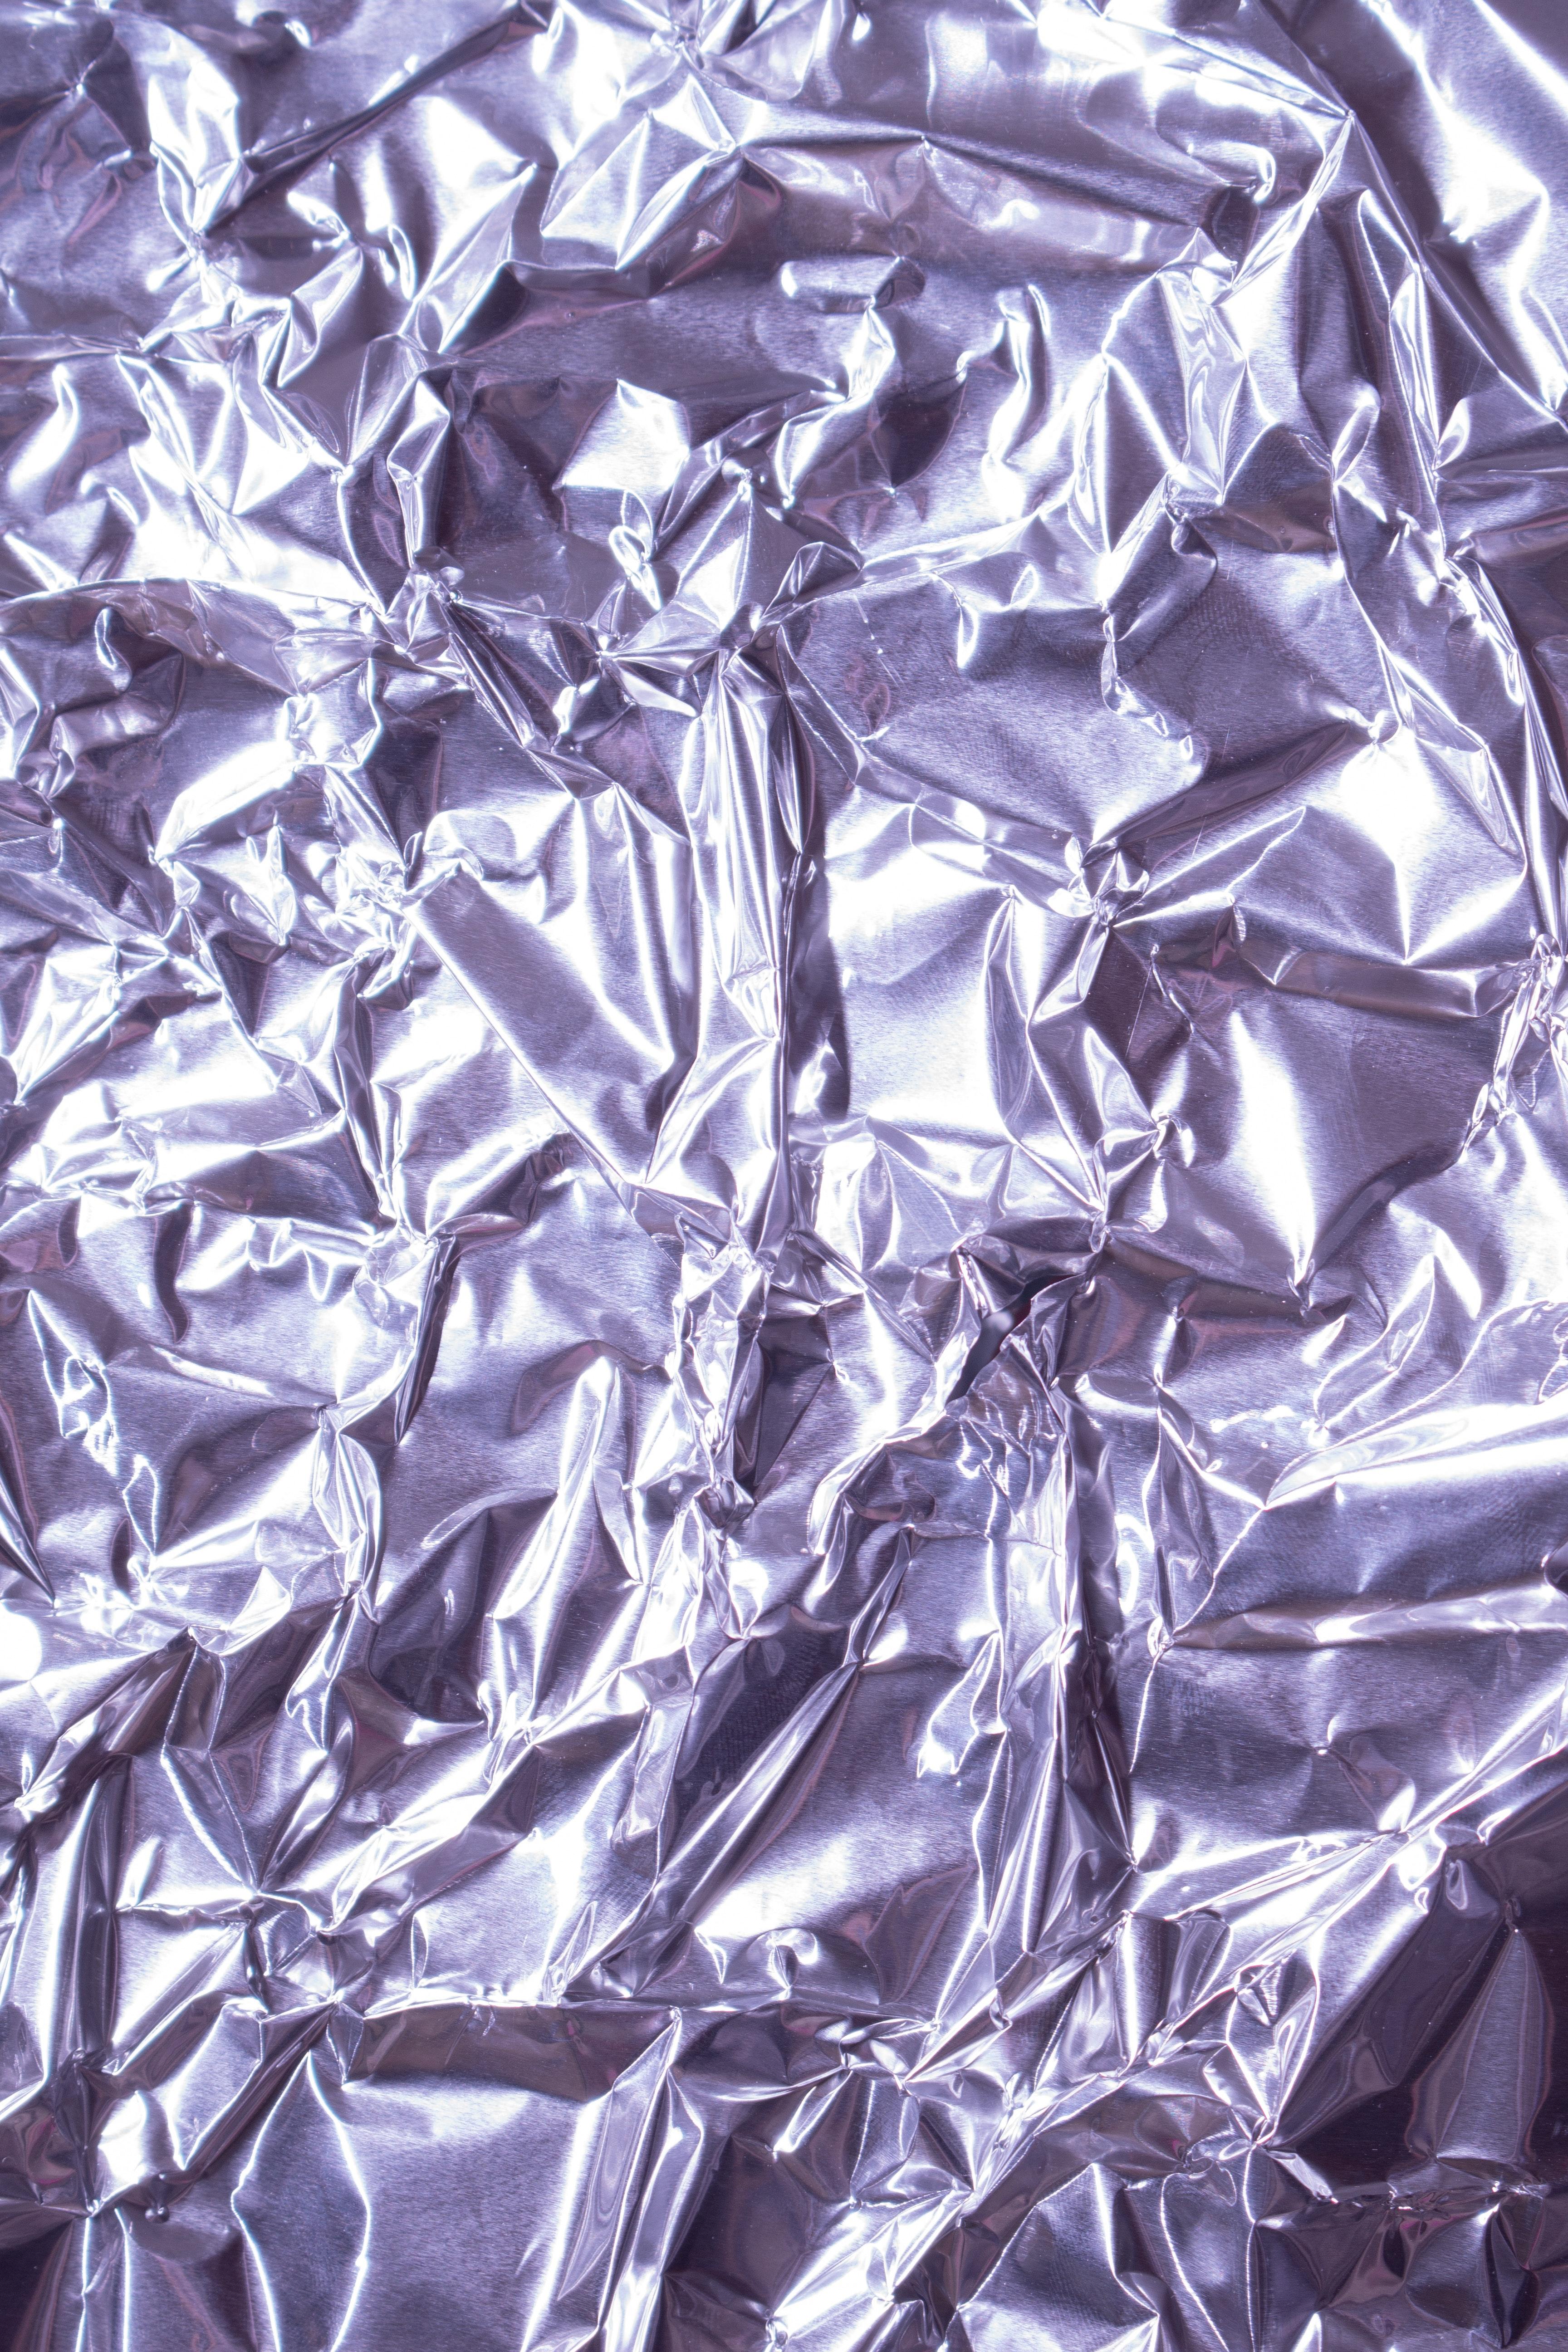 Why does aluminum foil block WiFi signals? 